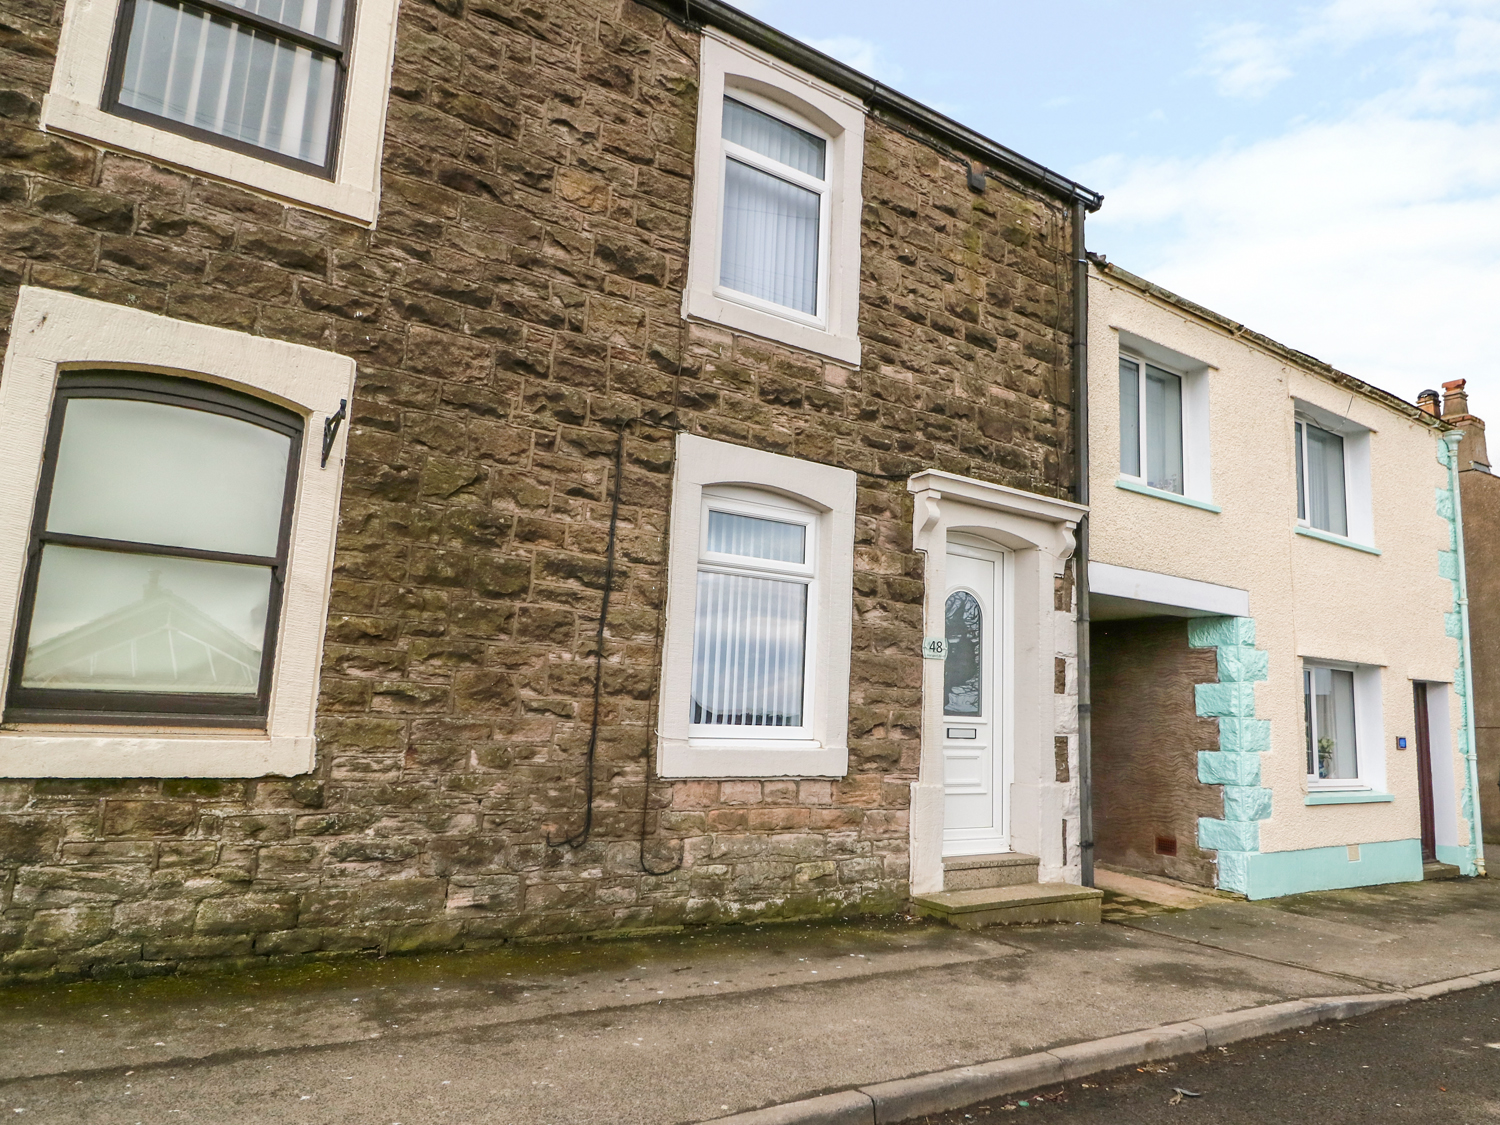 2 bedroom Cottage for rent in Maryport